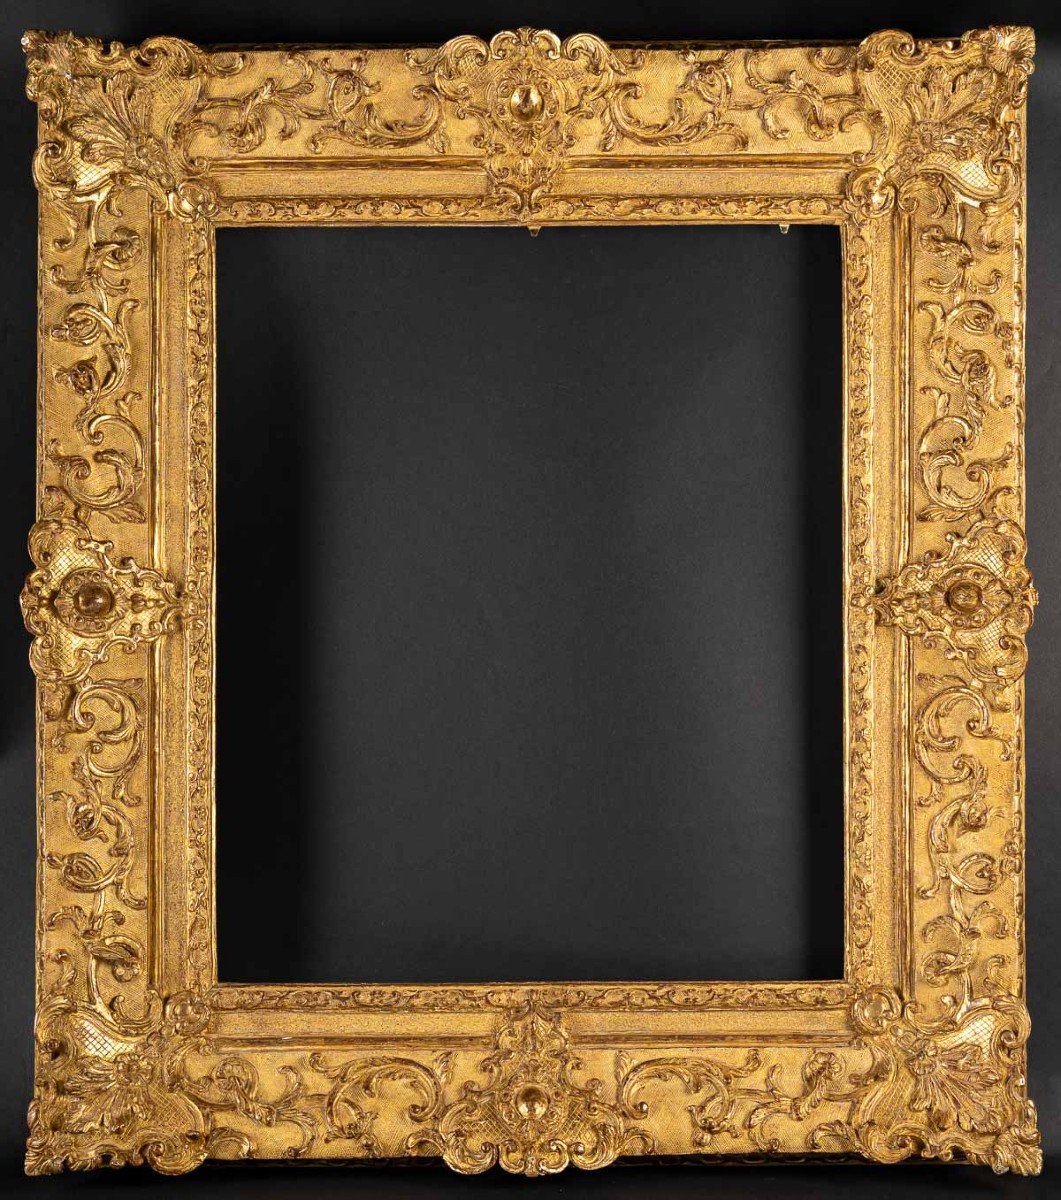 Superb Giltwood Frame From The Louis XIV Period